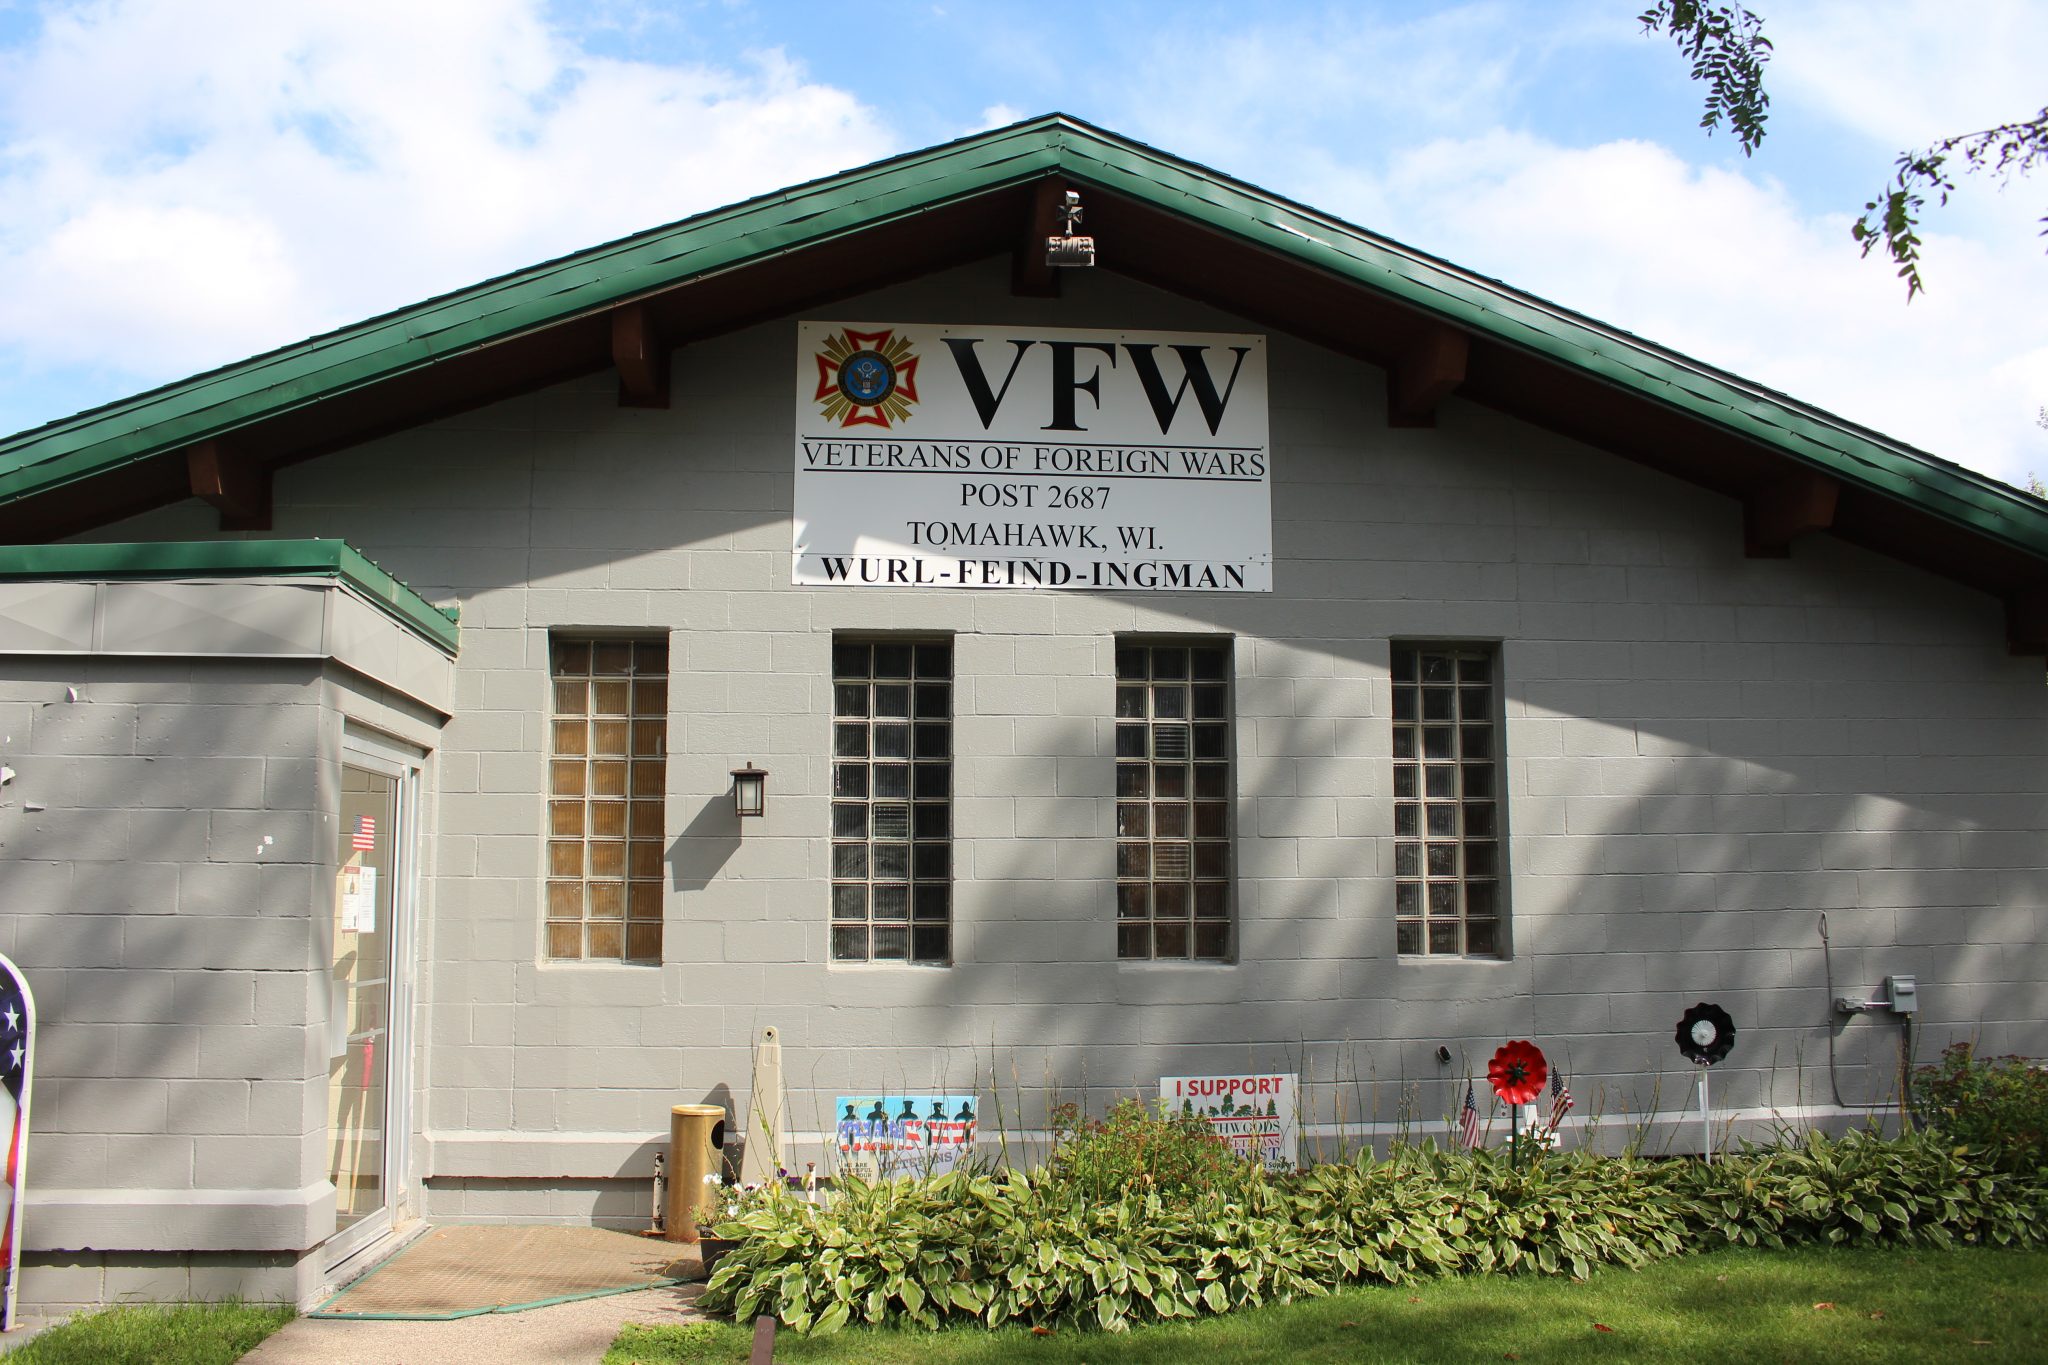 VFW Post 2687 and Auxiliary in Tomahawk offering essay, art contests